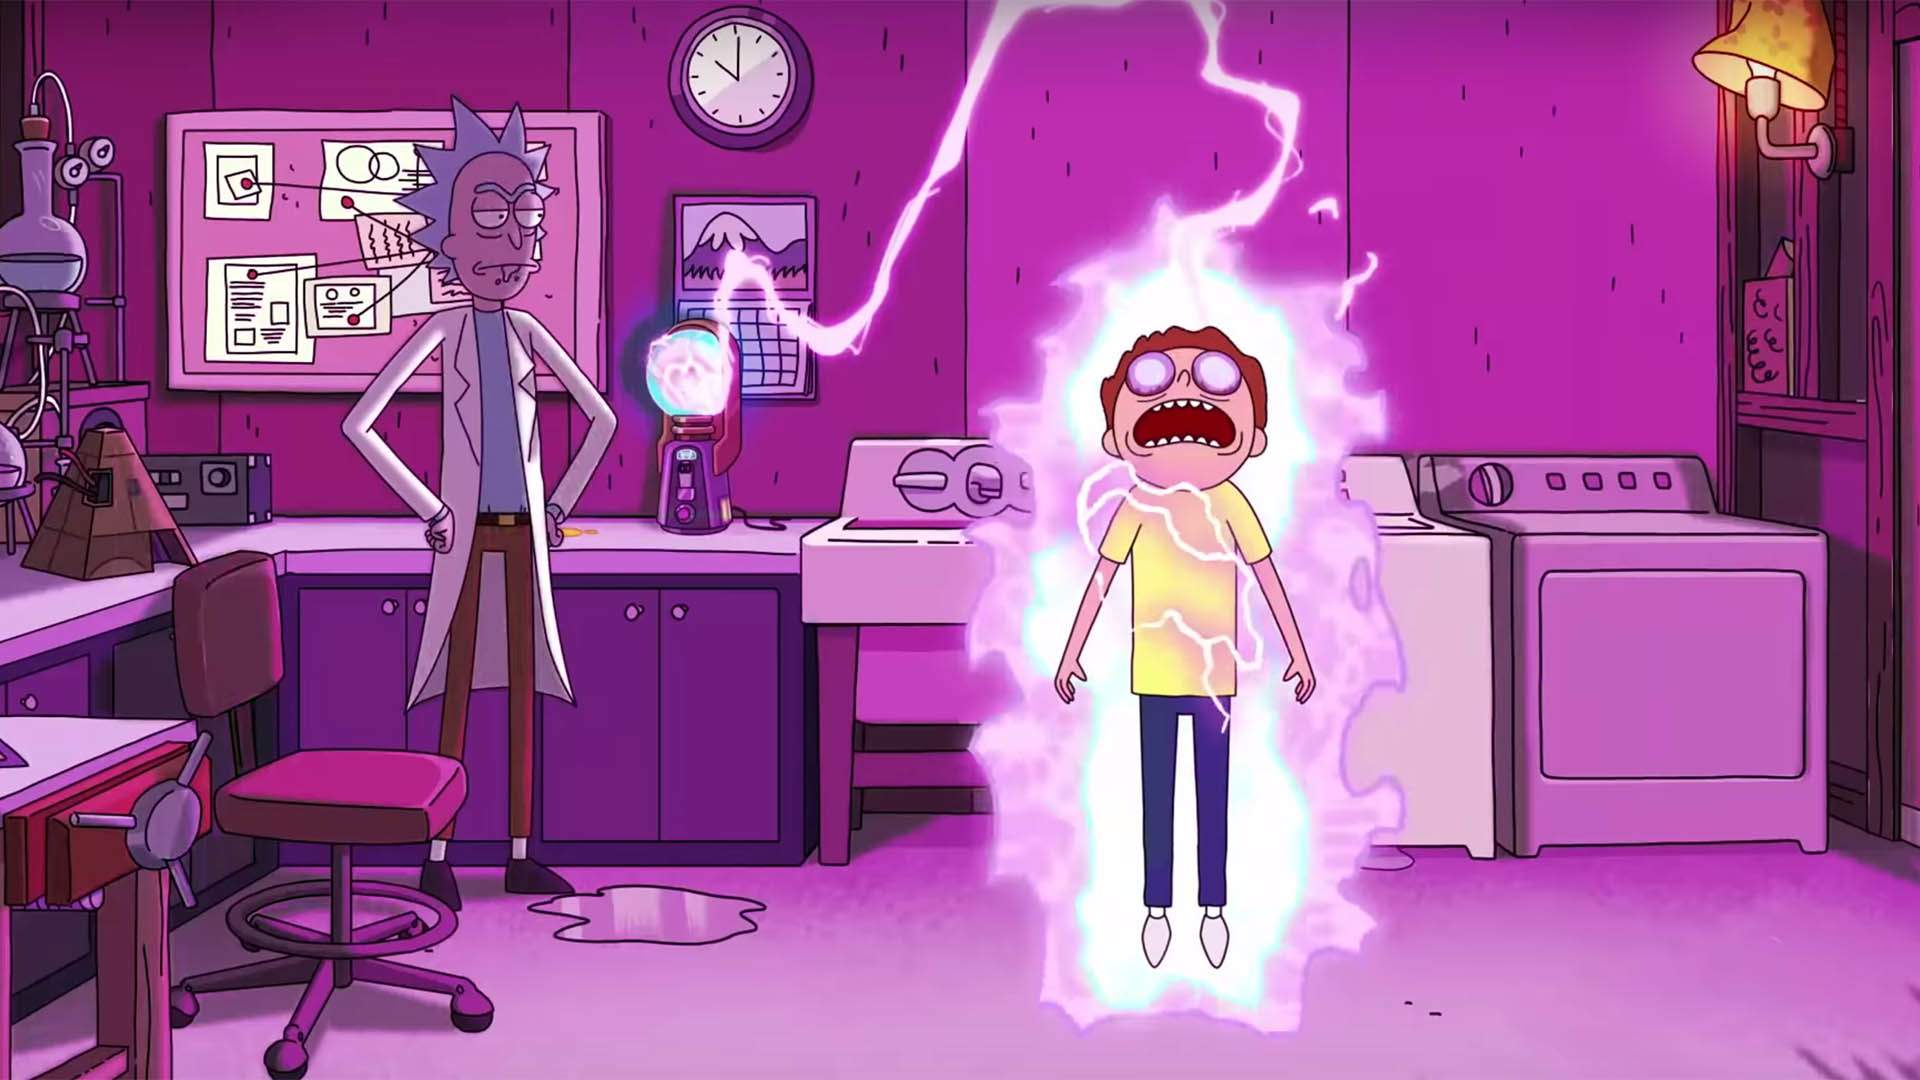 It's time to get schwifty, Rick and Morty fans - again. 